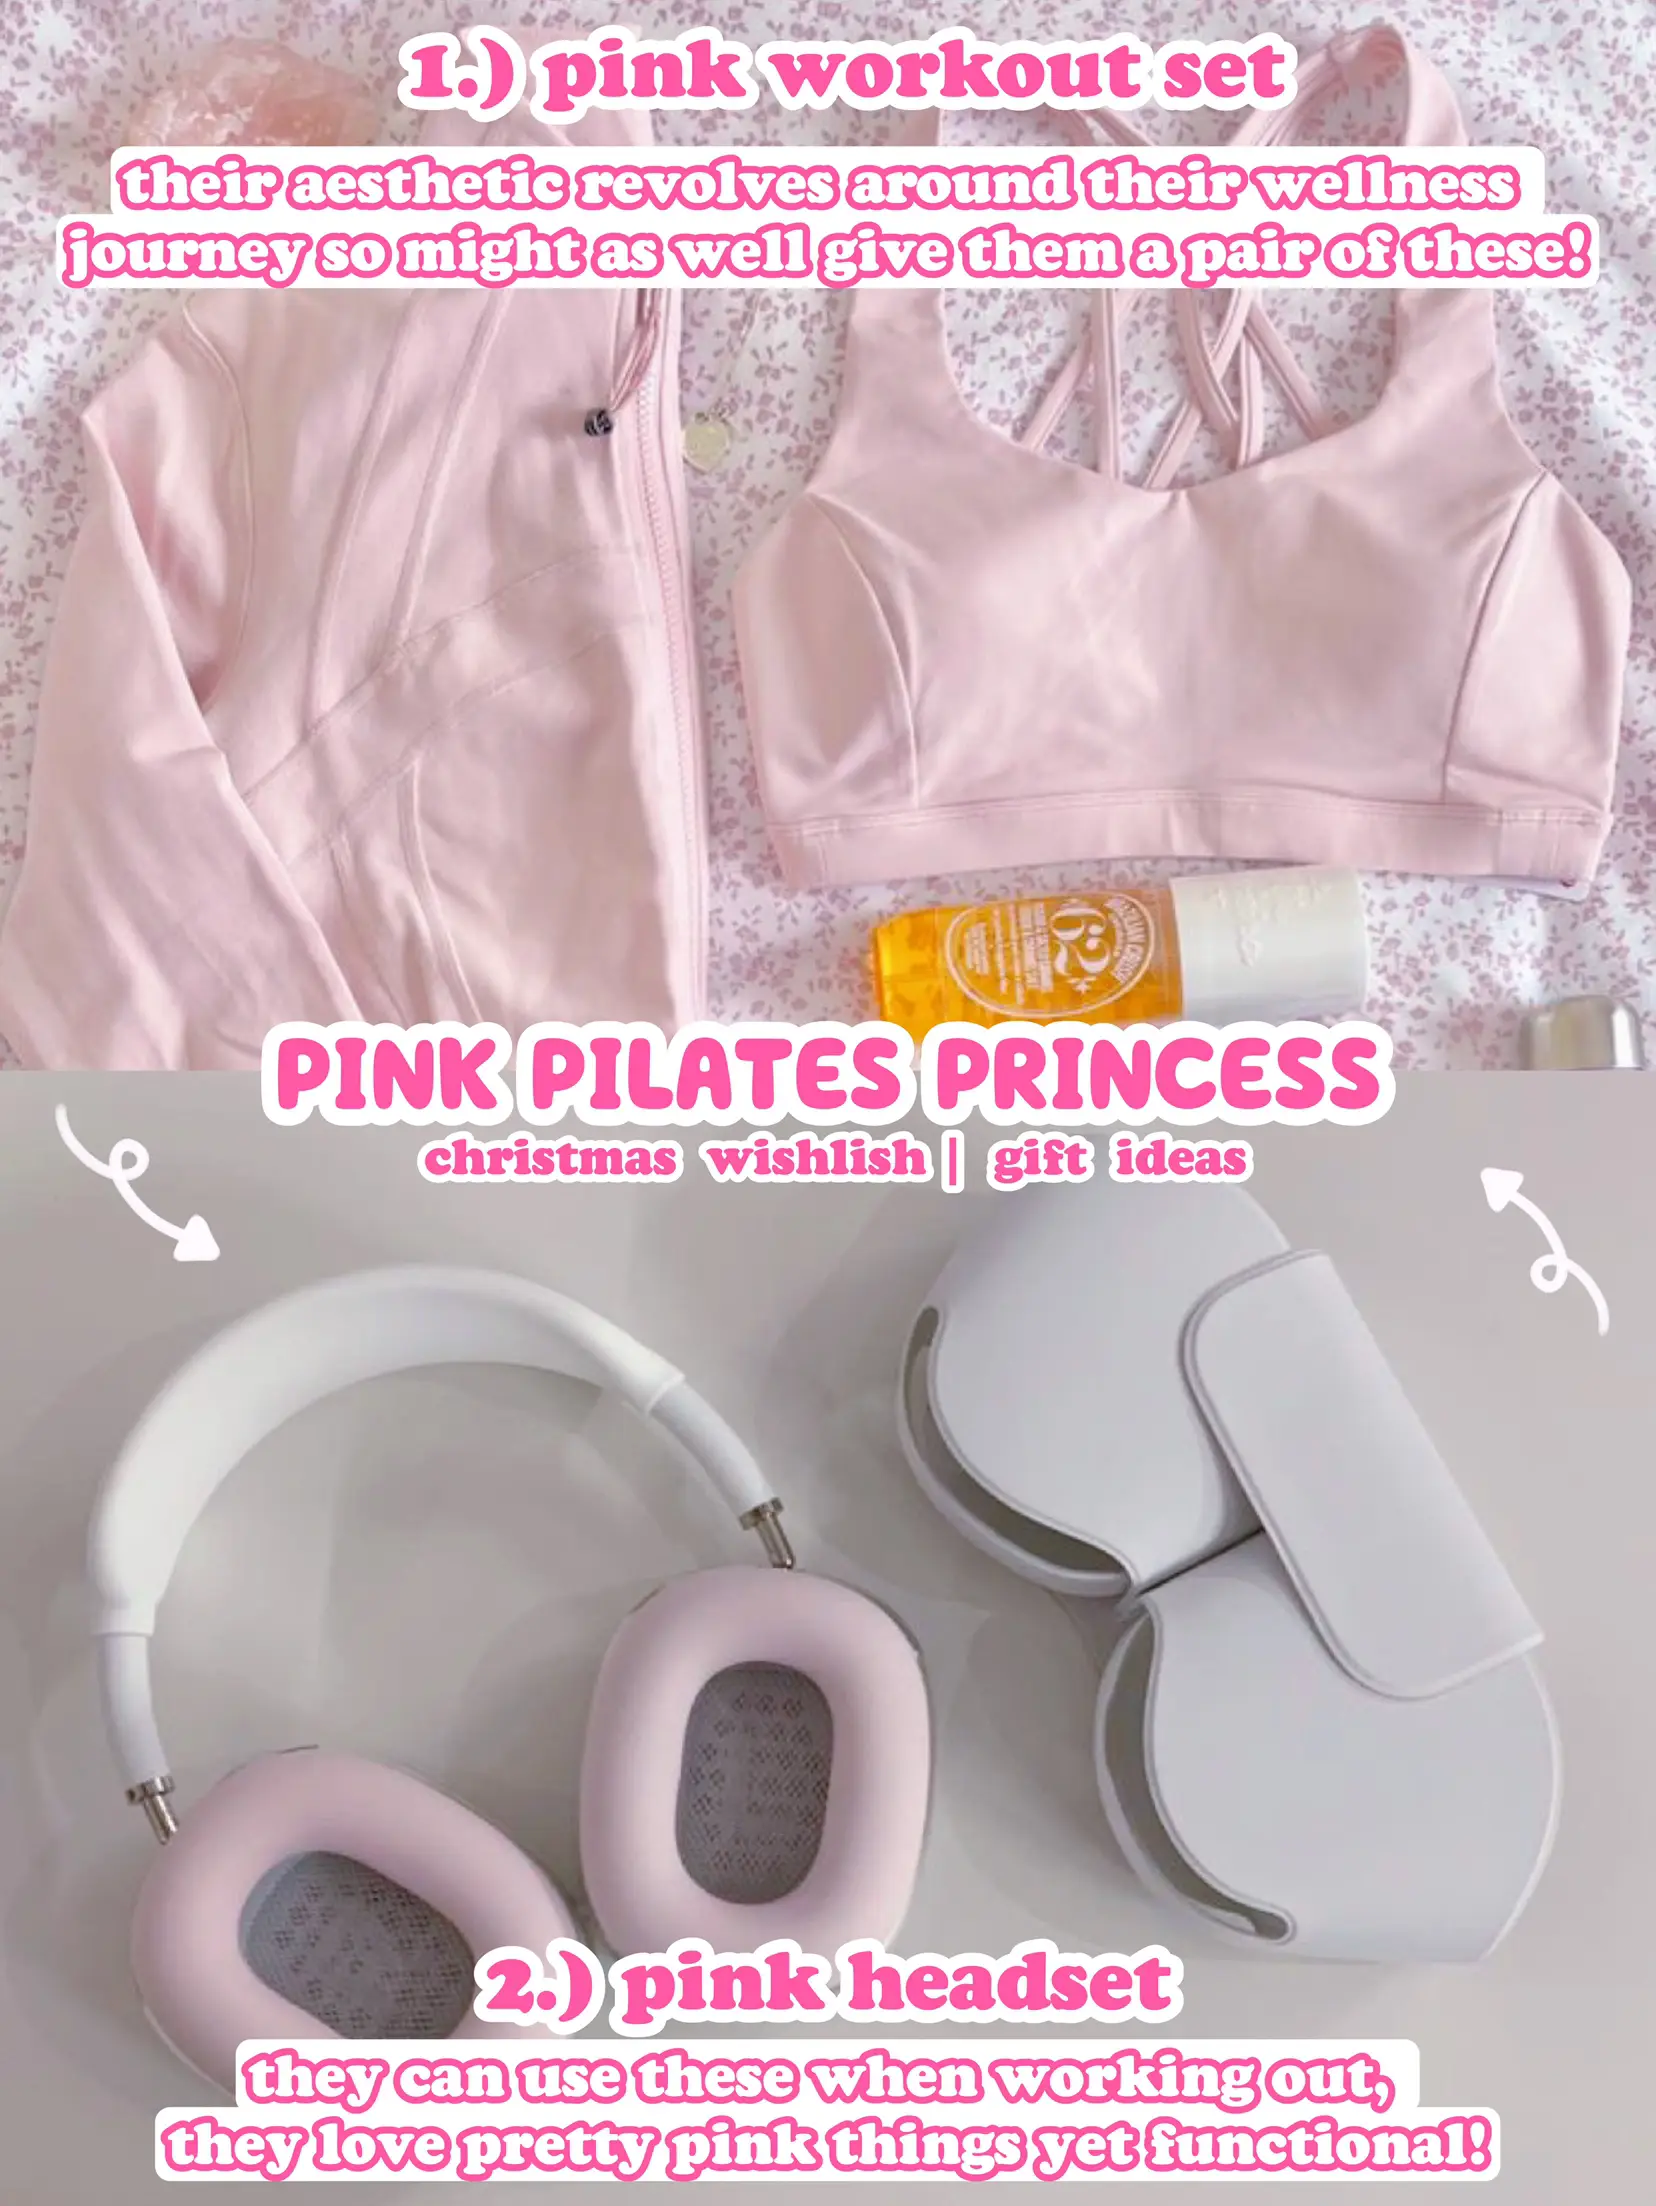 How To Achieve The Pink Pilates Princess Aesthetic